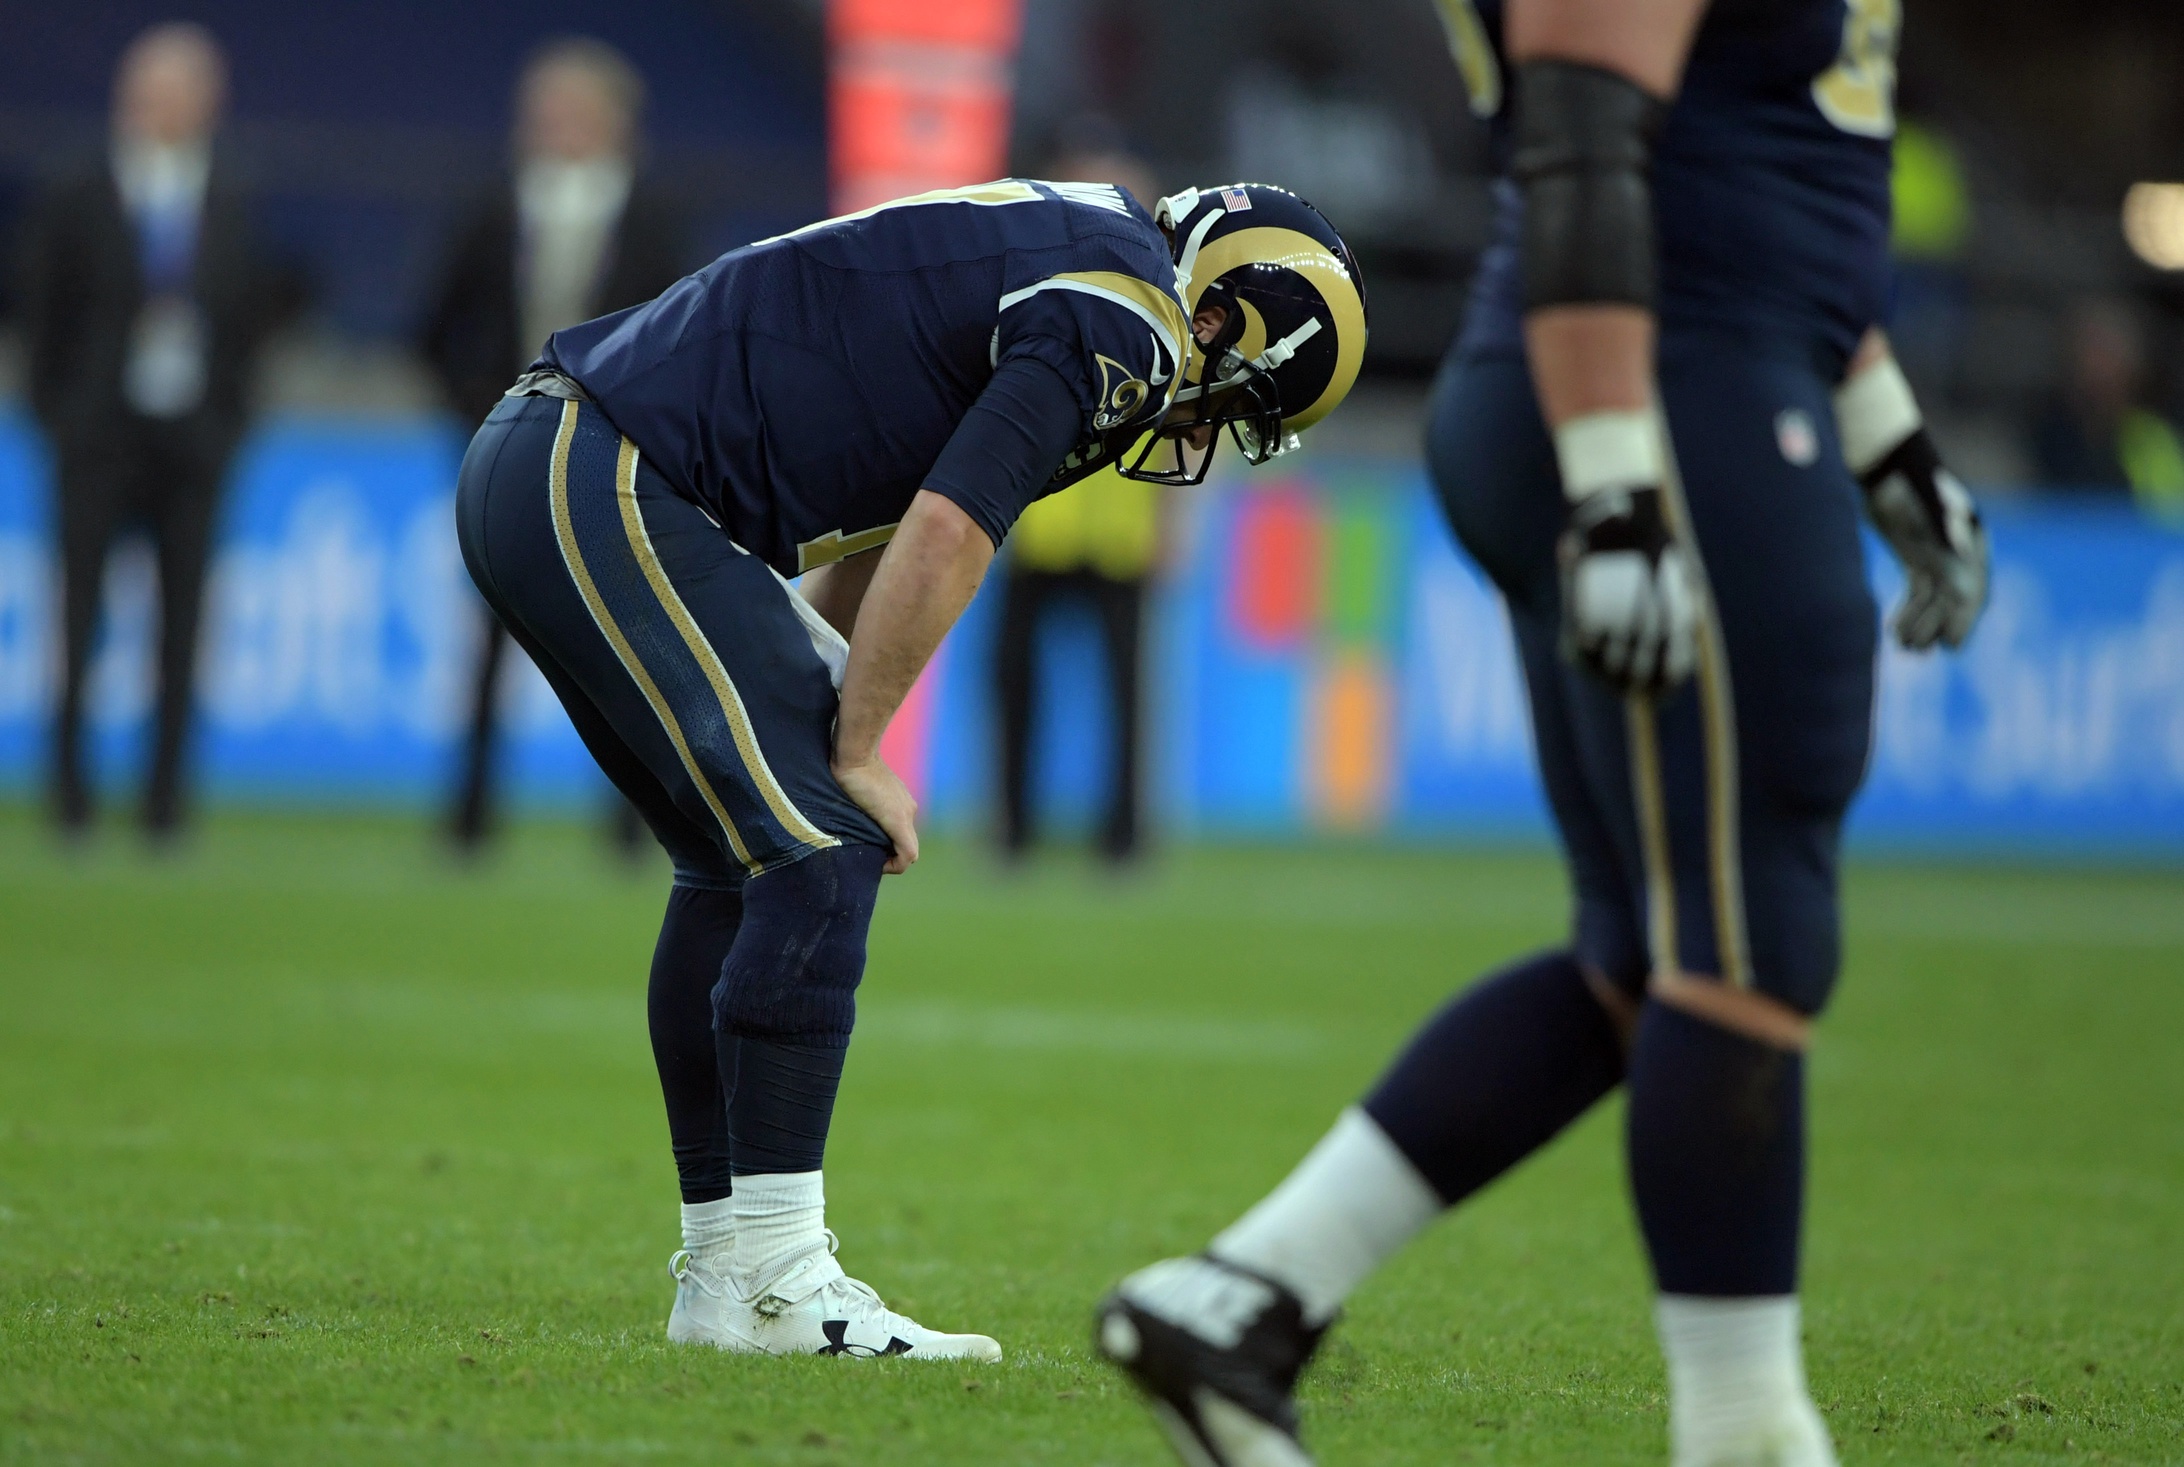 Oct 23, 2016; London, United Kingdom; Los Angeles Rams quarterback Case Keenum (17) reacts after throwing his fourth interception against the New York Giants during game 16 of the NFL International Series at Twickenham Statdium. The Giants defeated the Rams 17-10. Mandatory Credit: Kirby Lee-USA TODAY Sports 